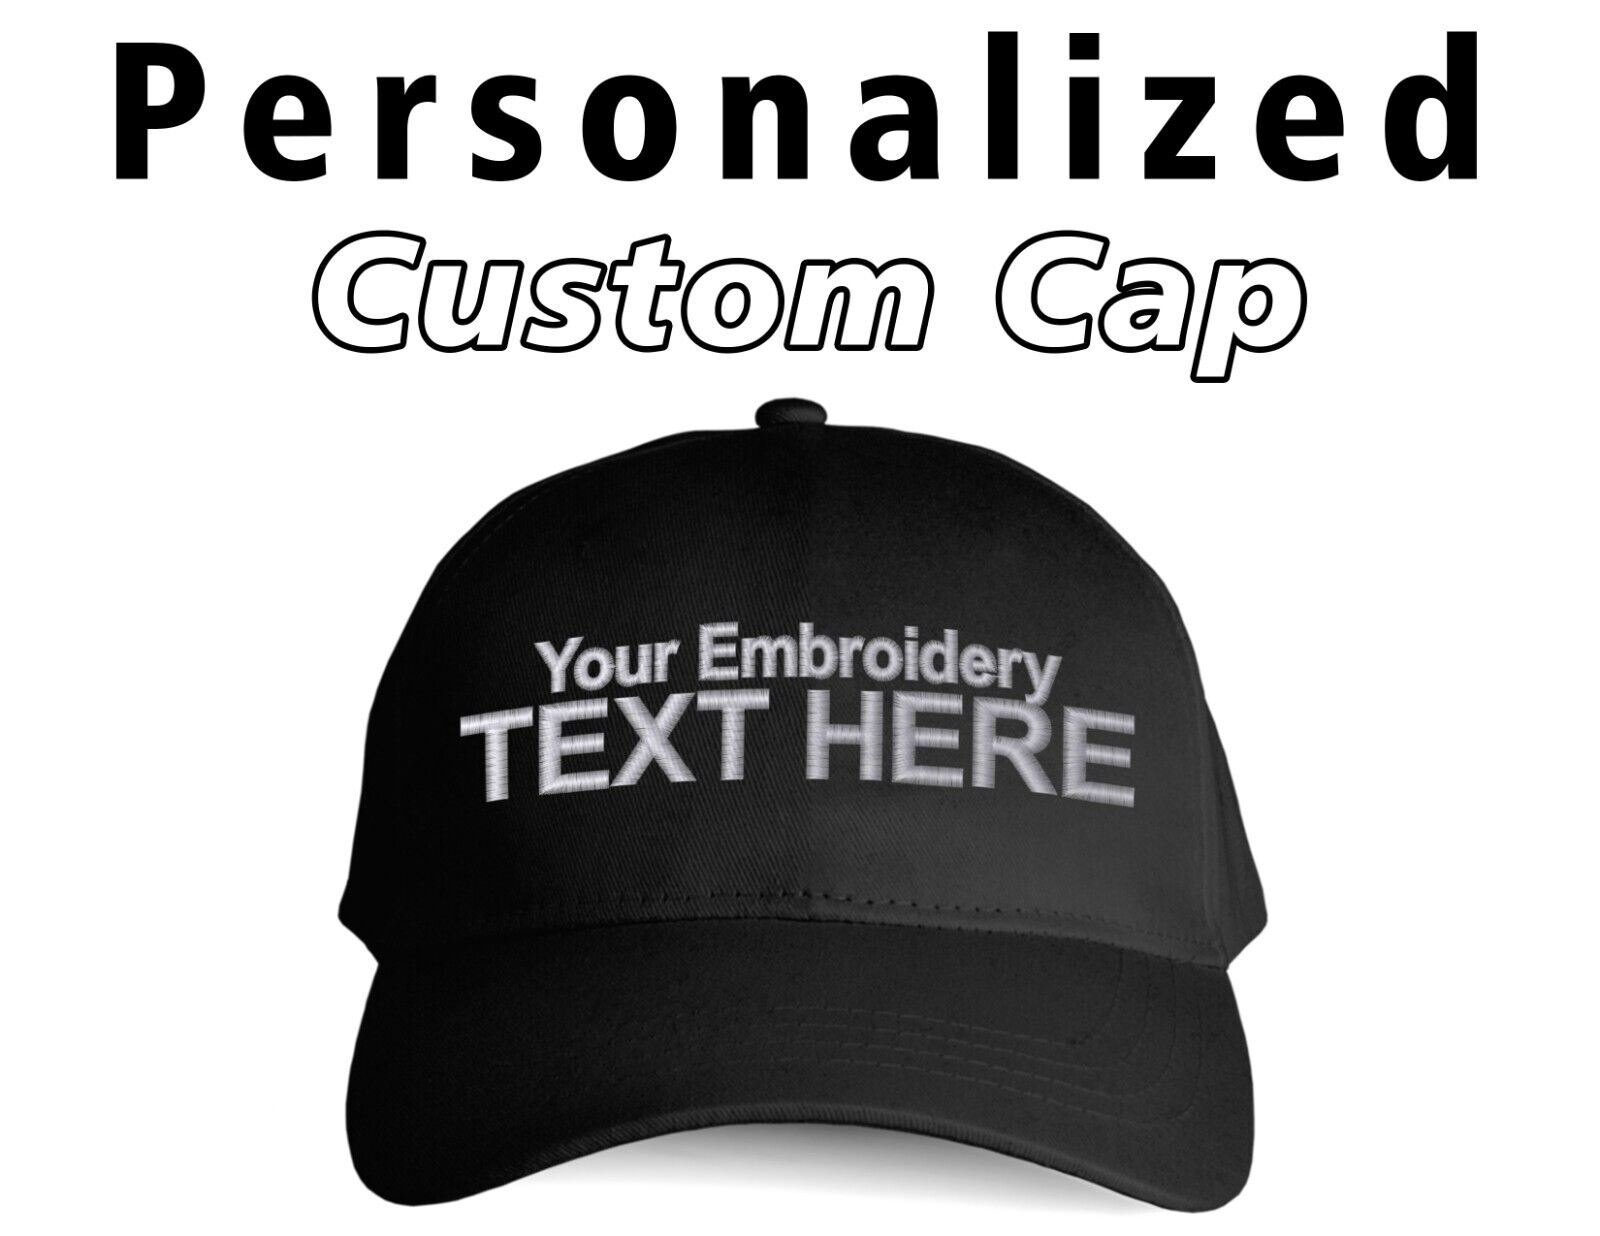 New Custom Personalized Multi Color Embroidered Baseball Hats Caps EMBROIDERED